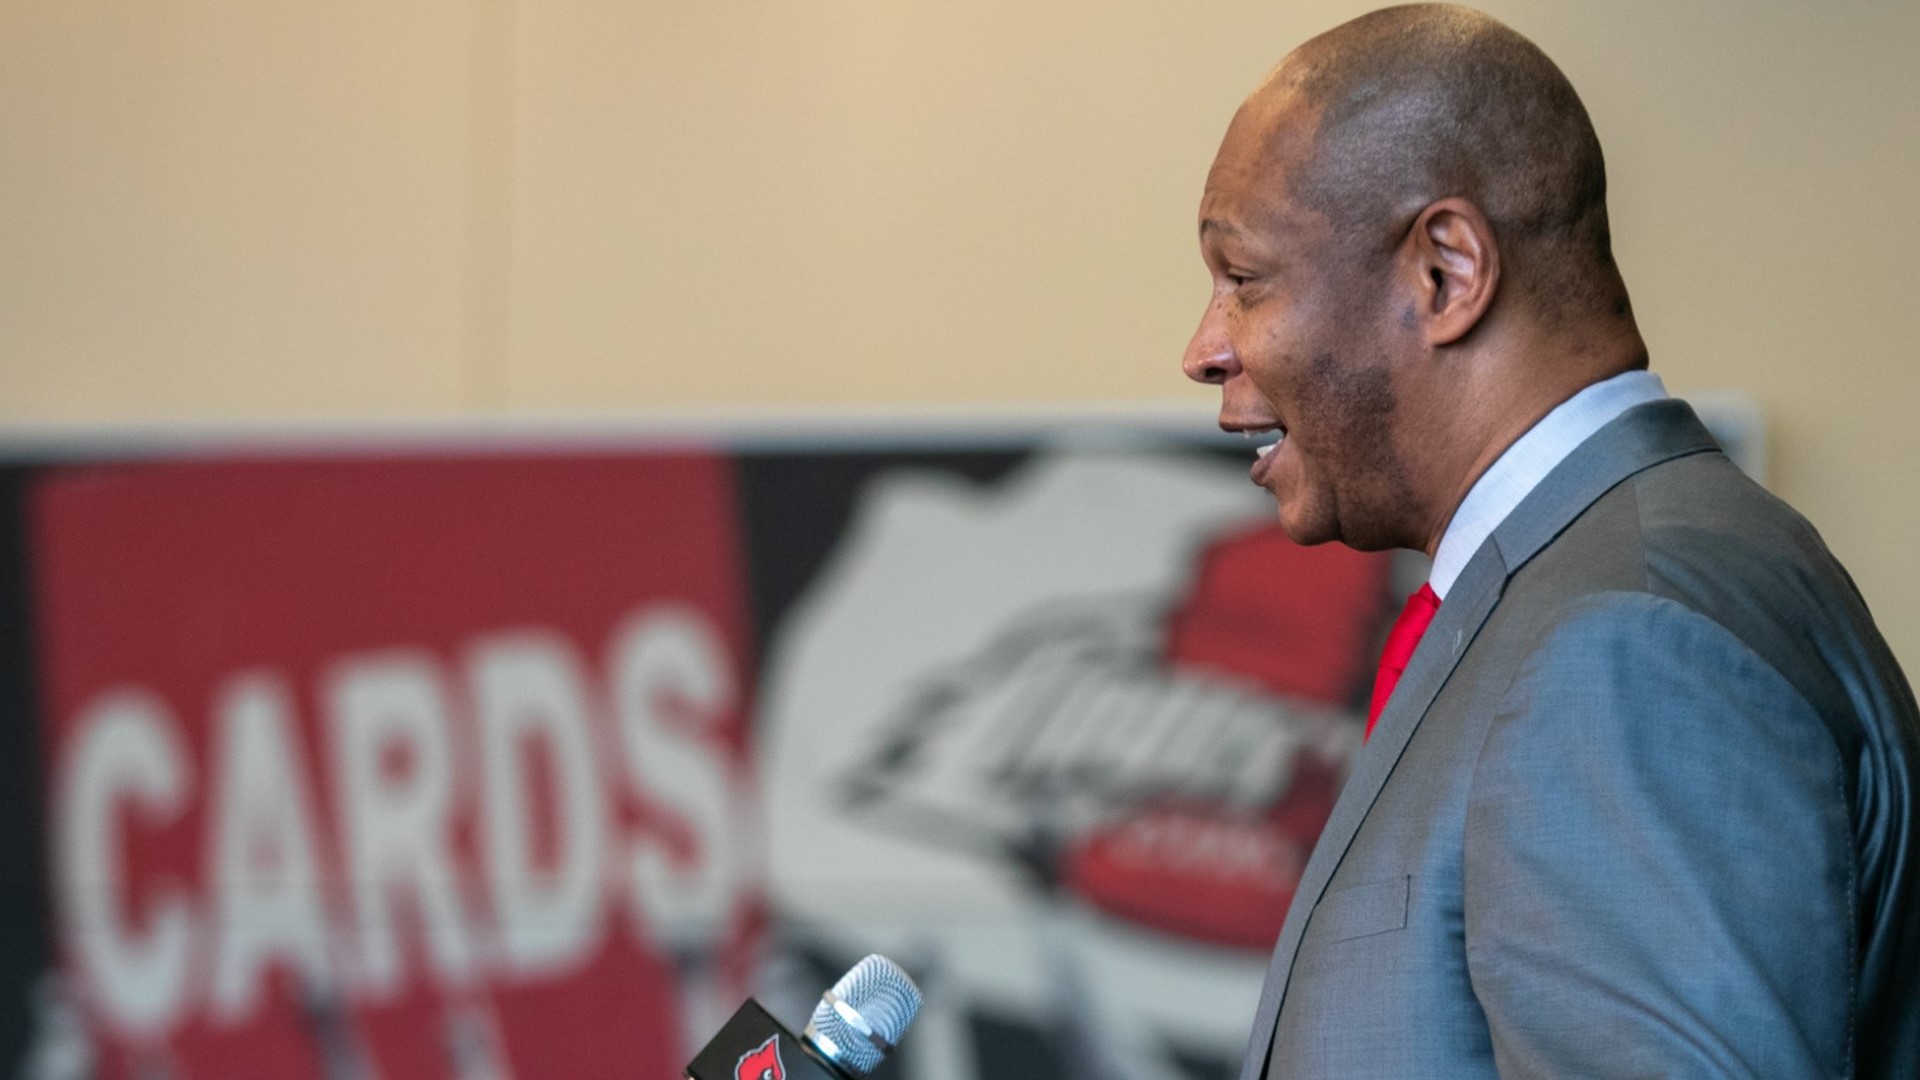 Kenny Payne wanted those in attendance to understand he realizes what his job as the Cards head coach is all about and wants their support through the good and bad.